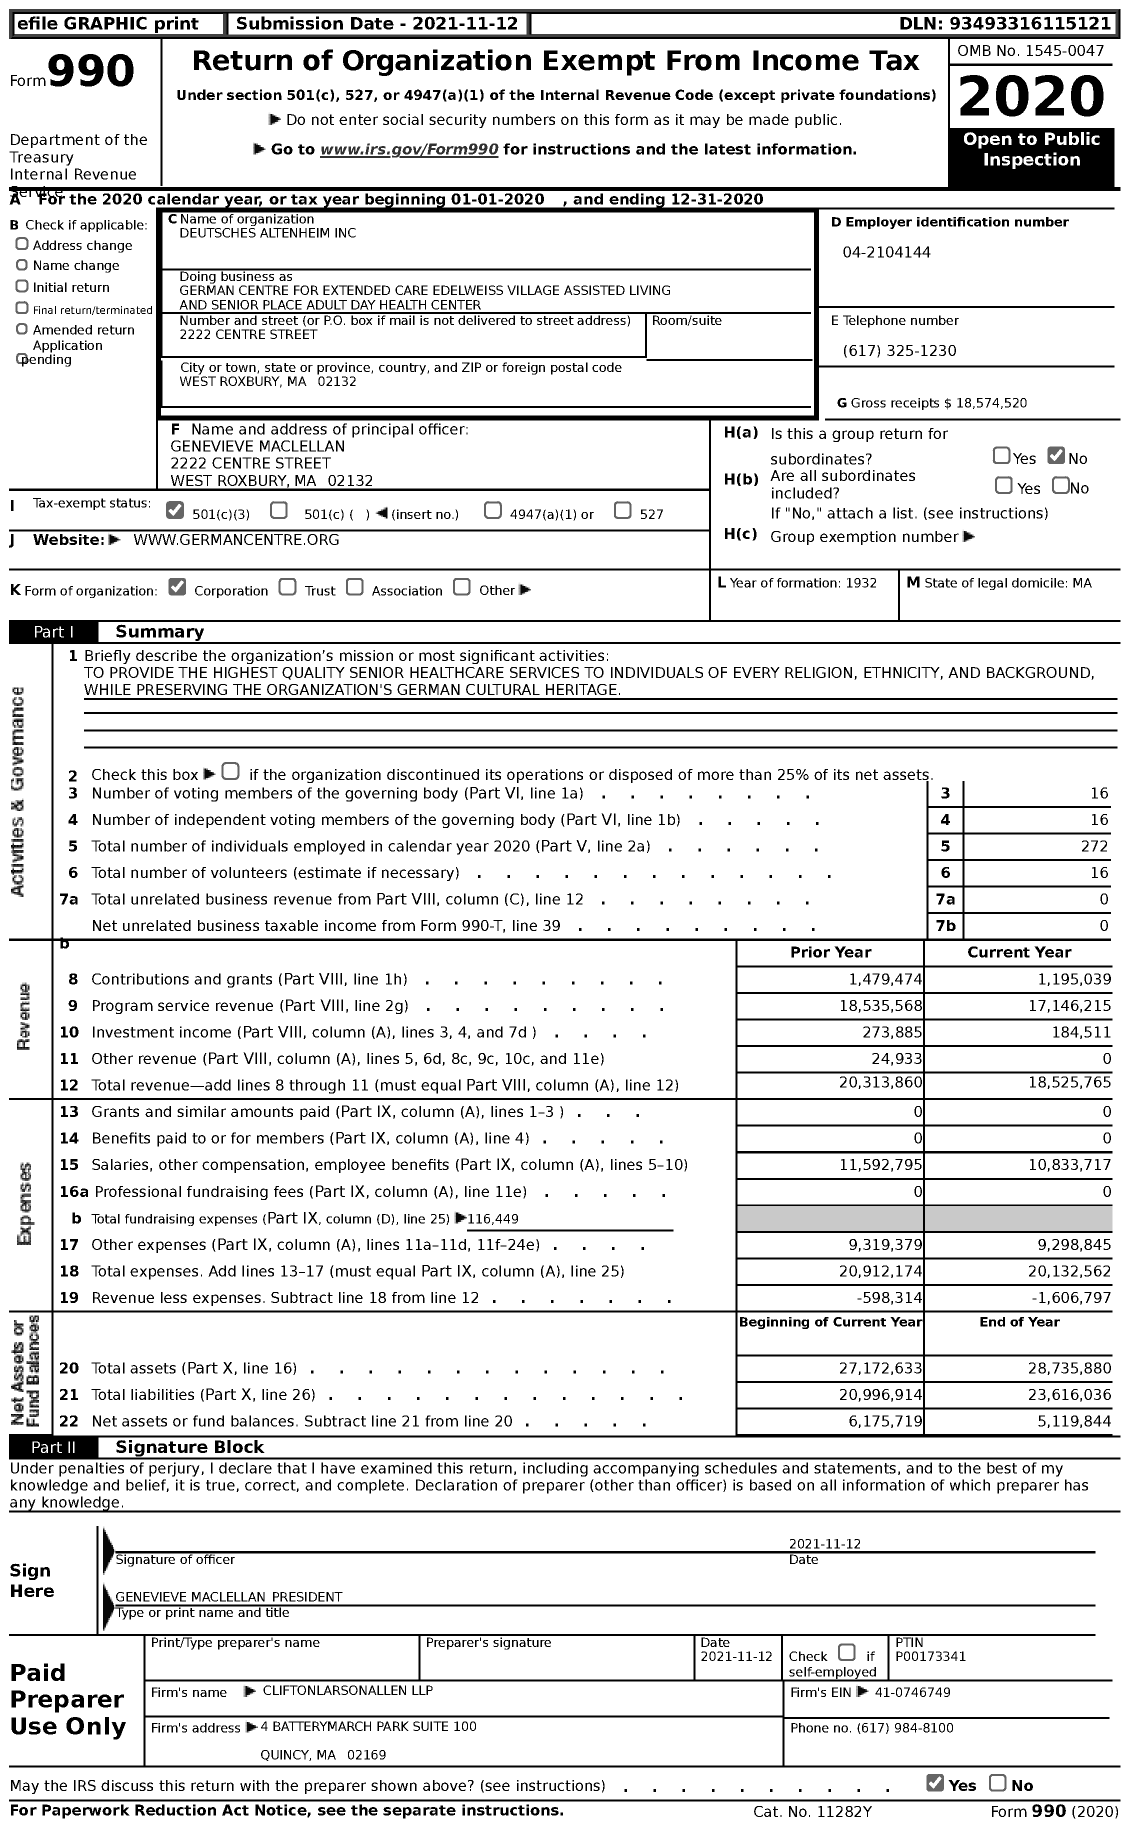 Image of first page of 2020 Form 990 for German Centre for Extended Care Edelweiss Village Assisted Living and Senior Place Adult Day Health Center